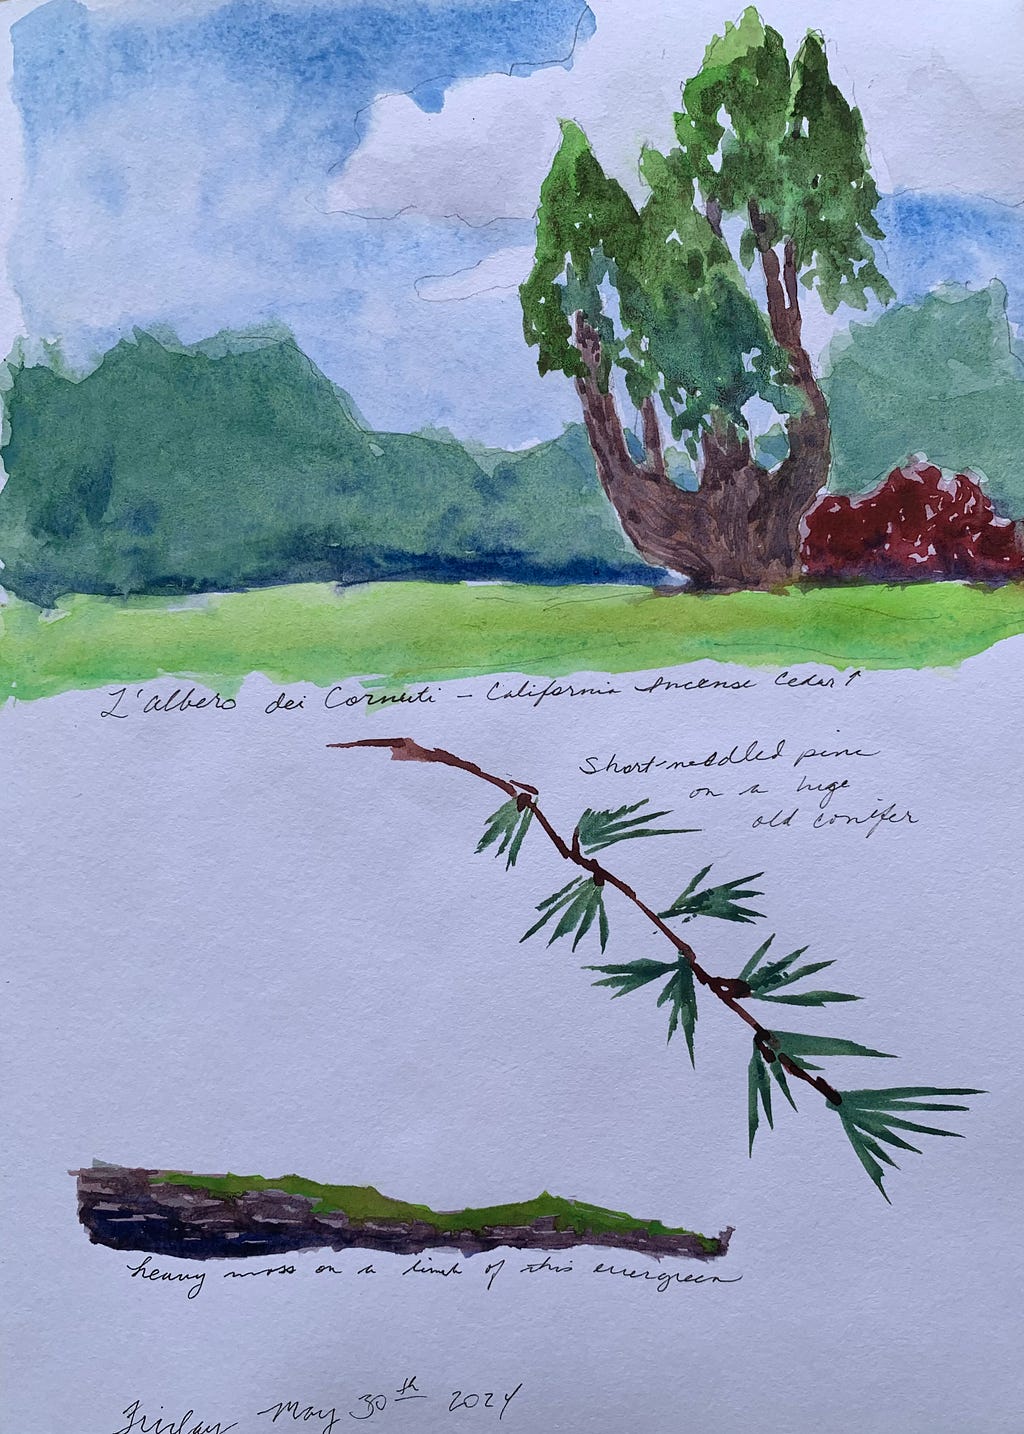 Photo of a watercolor journal entry by artist Roxanne Steed, depicting a L’Albero dei Cornuti (California Incense-cedar), a pine branch with alternating short needles, and a mossy branch at the Giardino del Boblino in Florence, Italy.